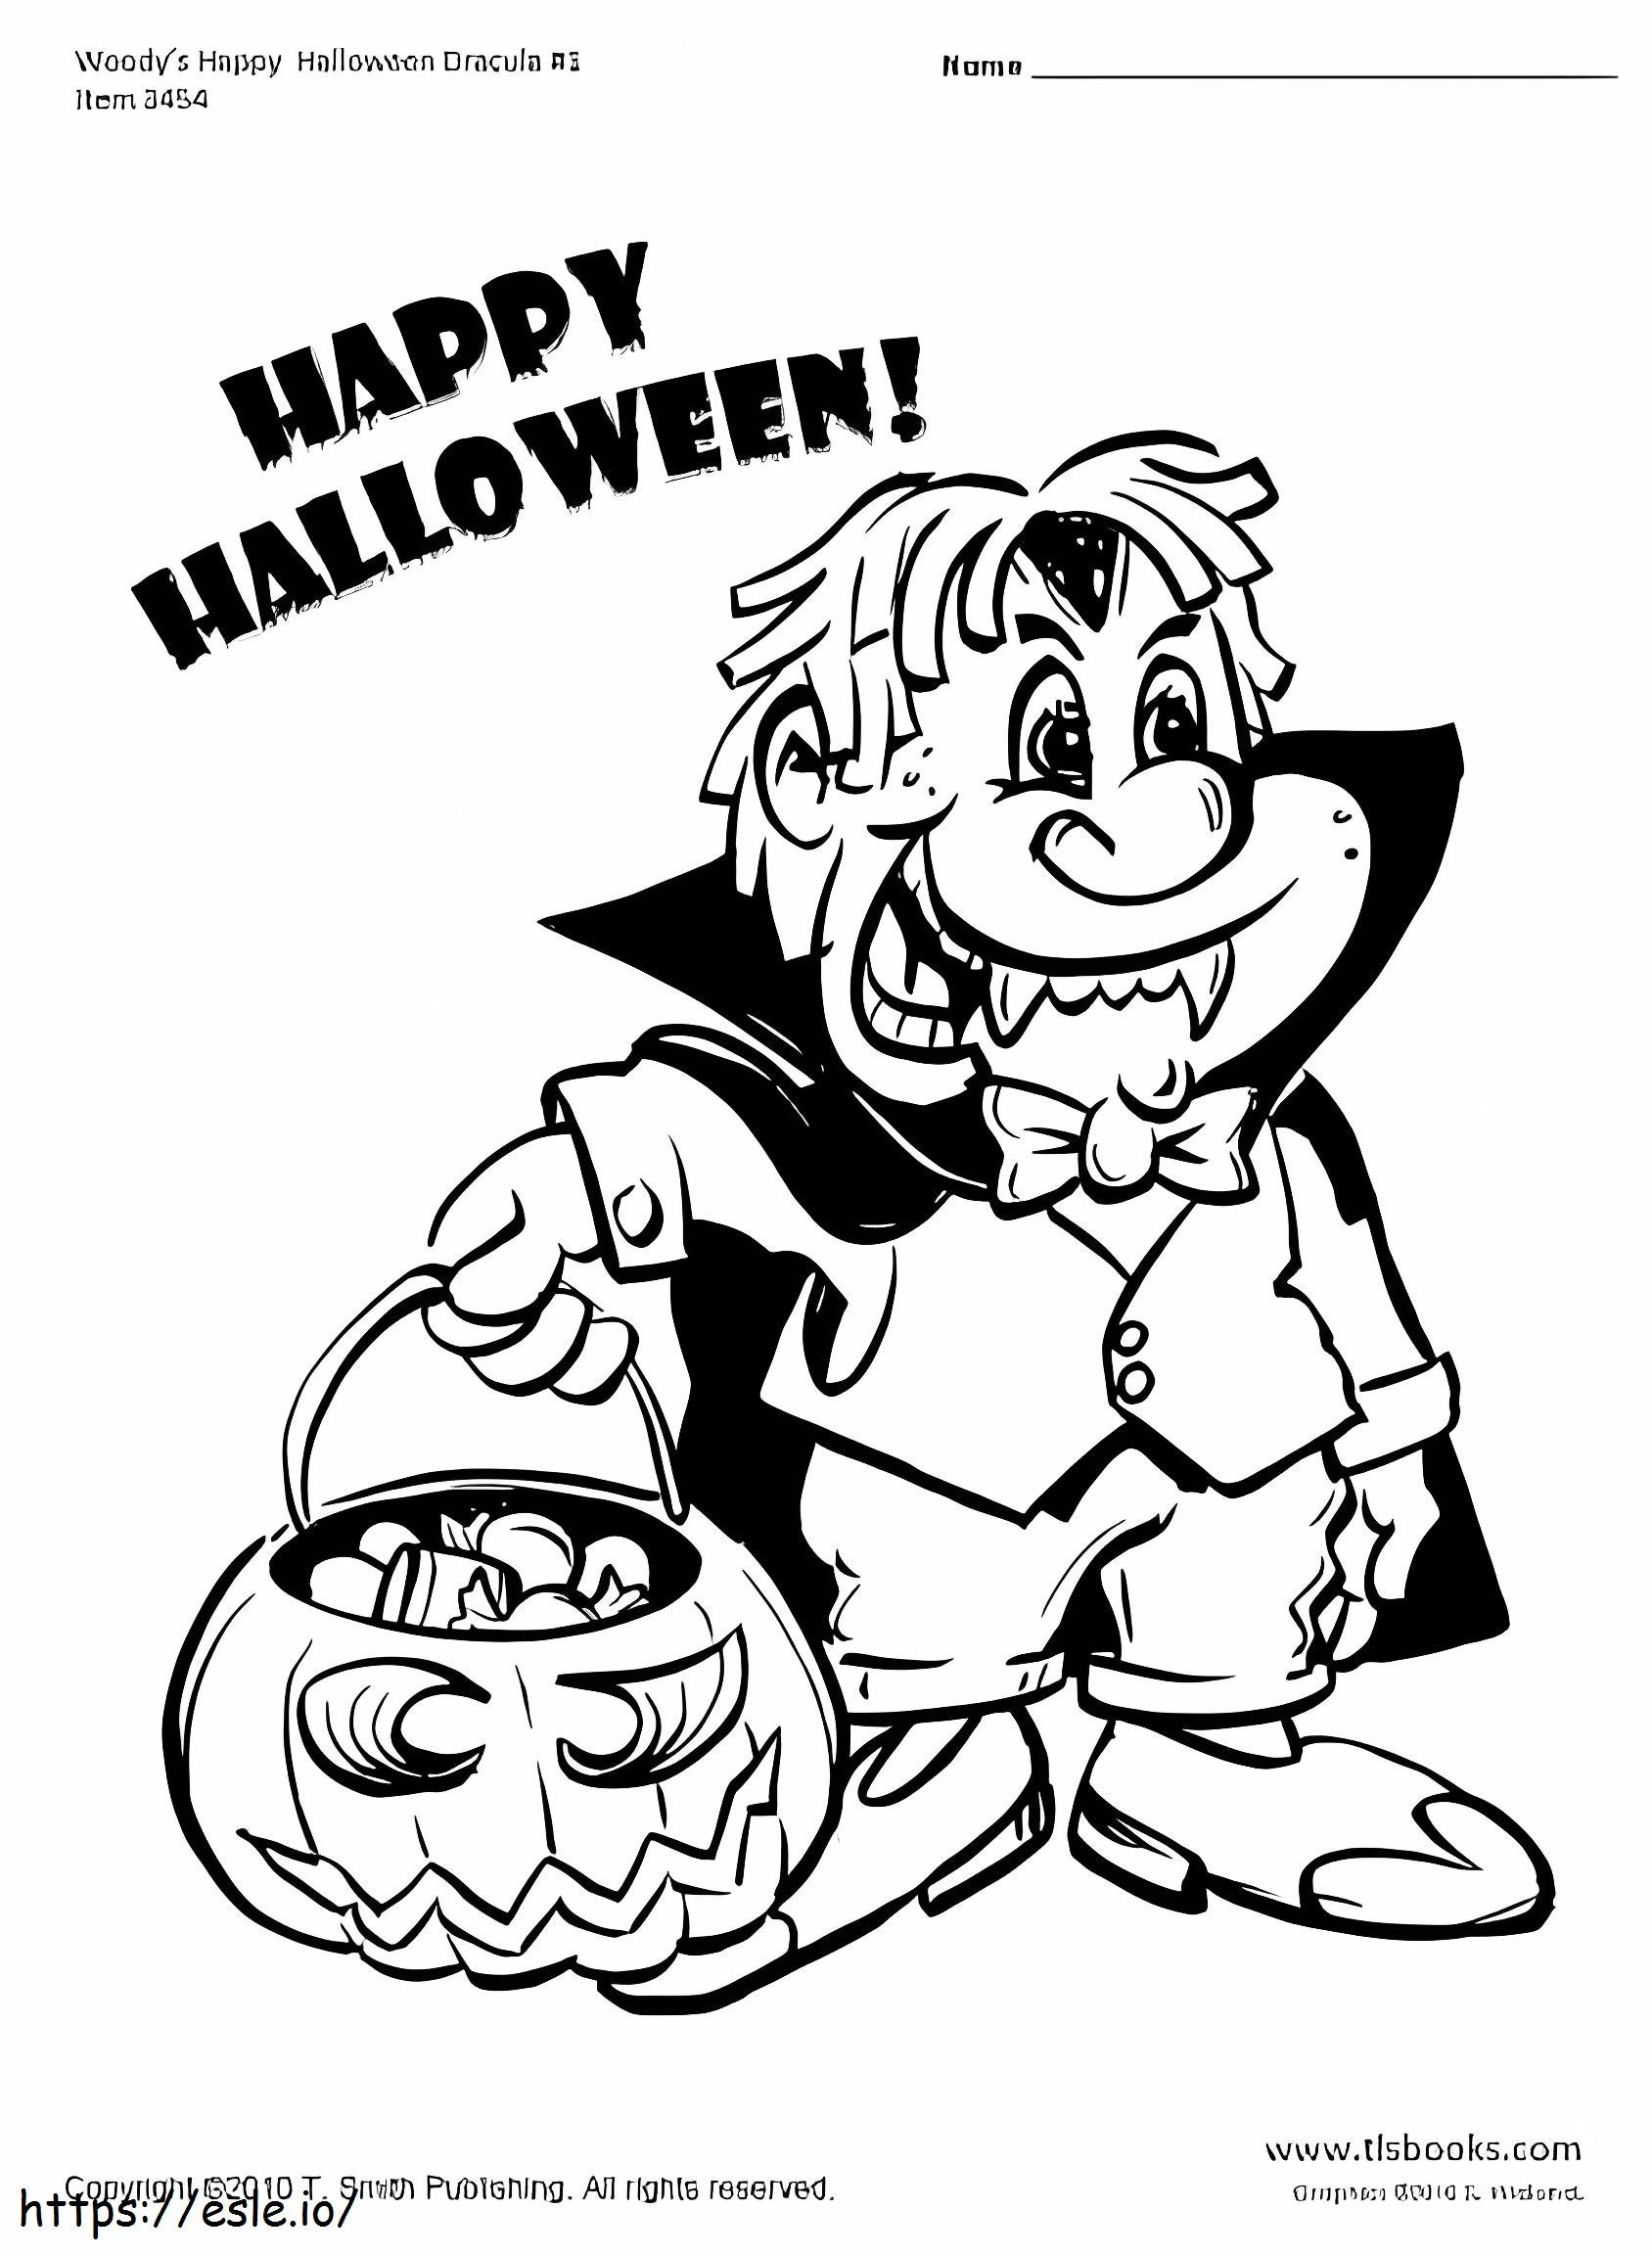 Woody Costume With Dracula coloring page